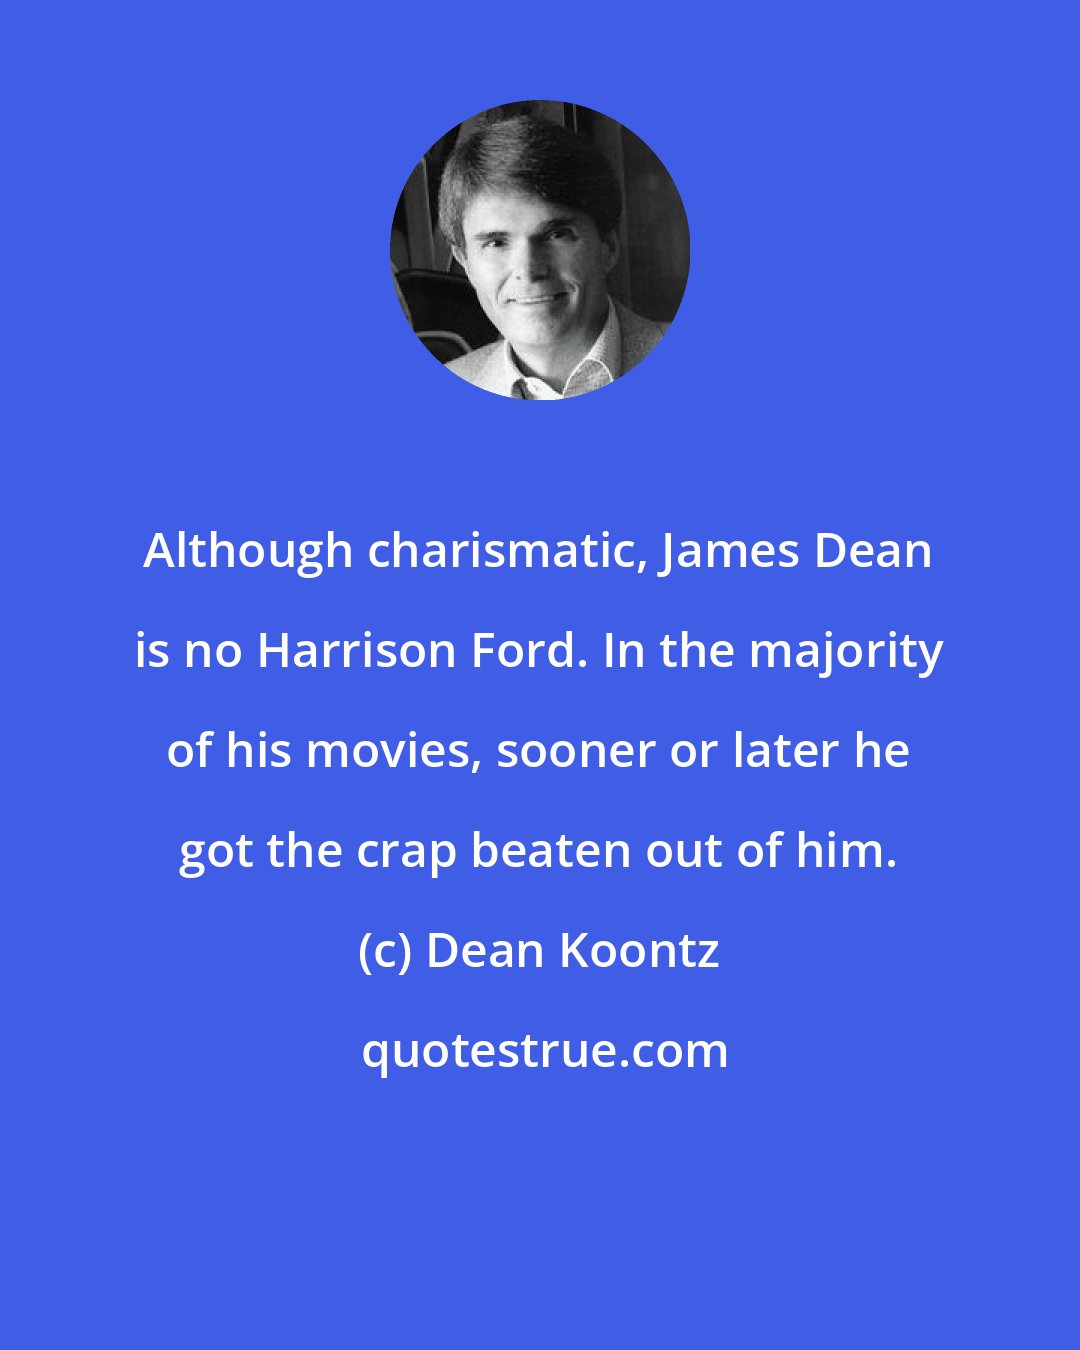 Dean Koontz: Although charismatic, James Dean is no Harrison Ford. In the majority of his movies, sooner or later he got the crap beaten out of him.